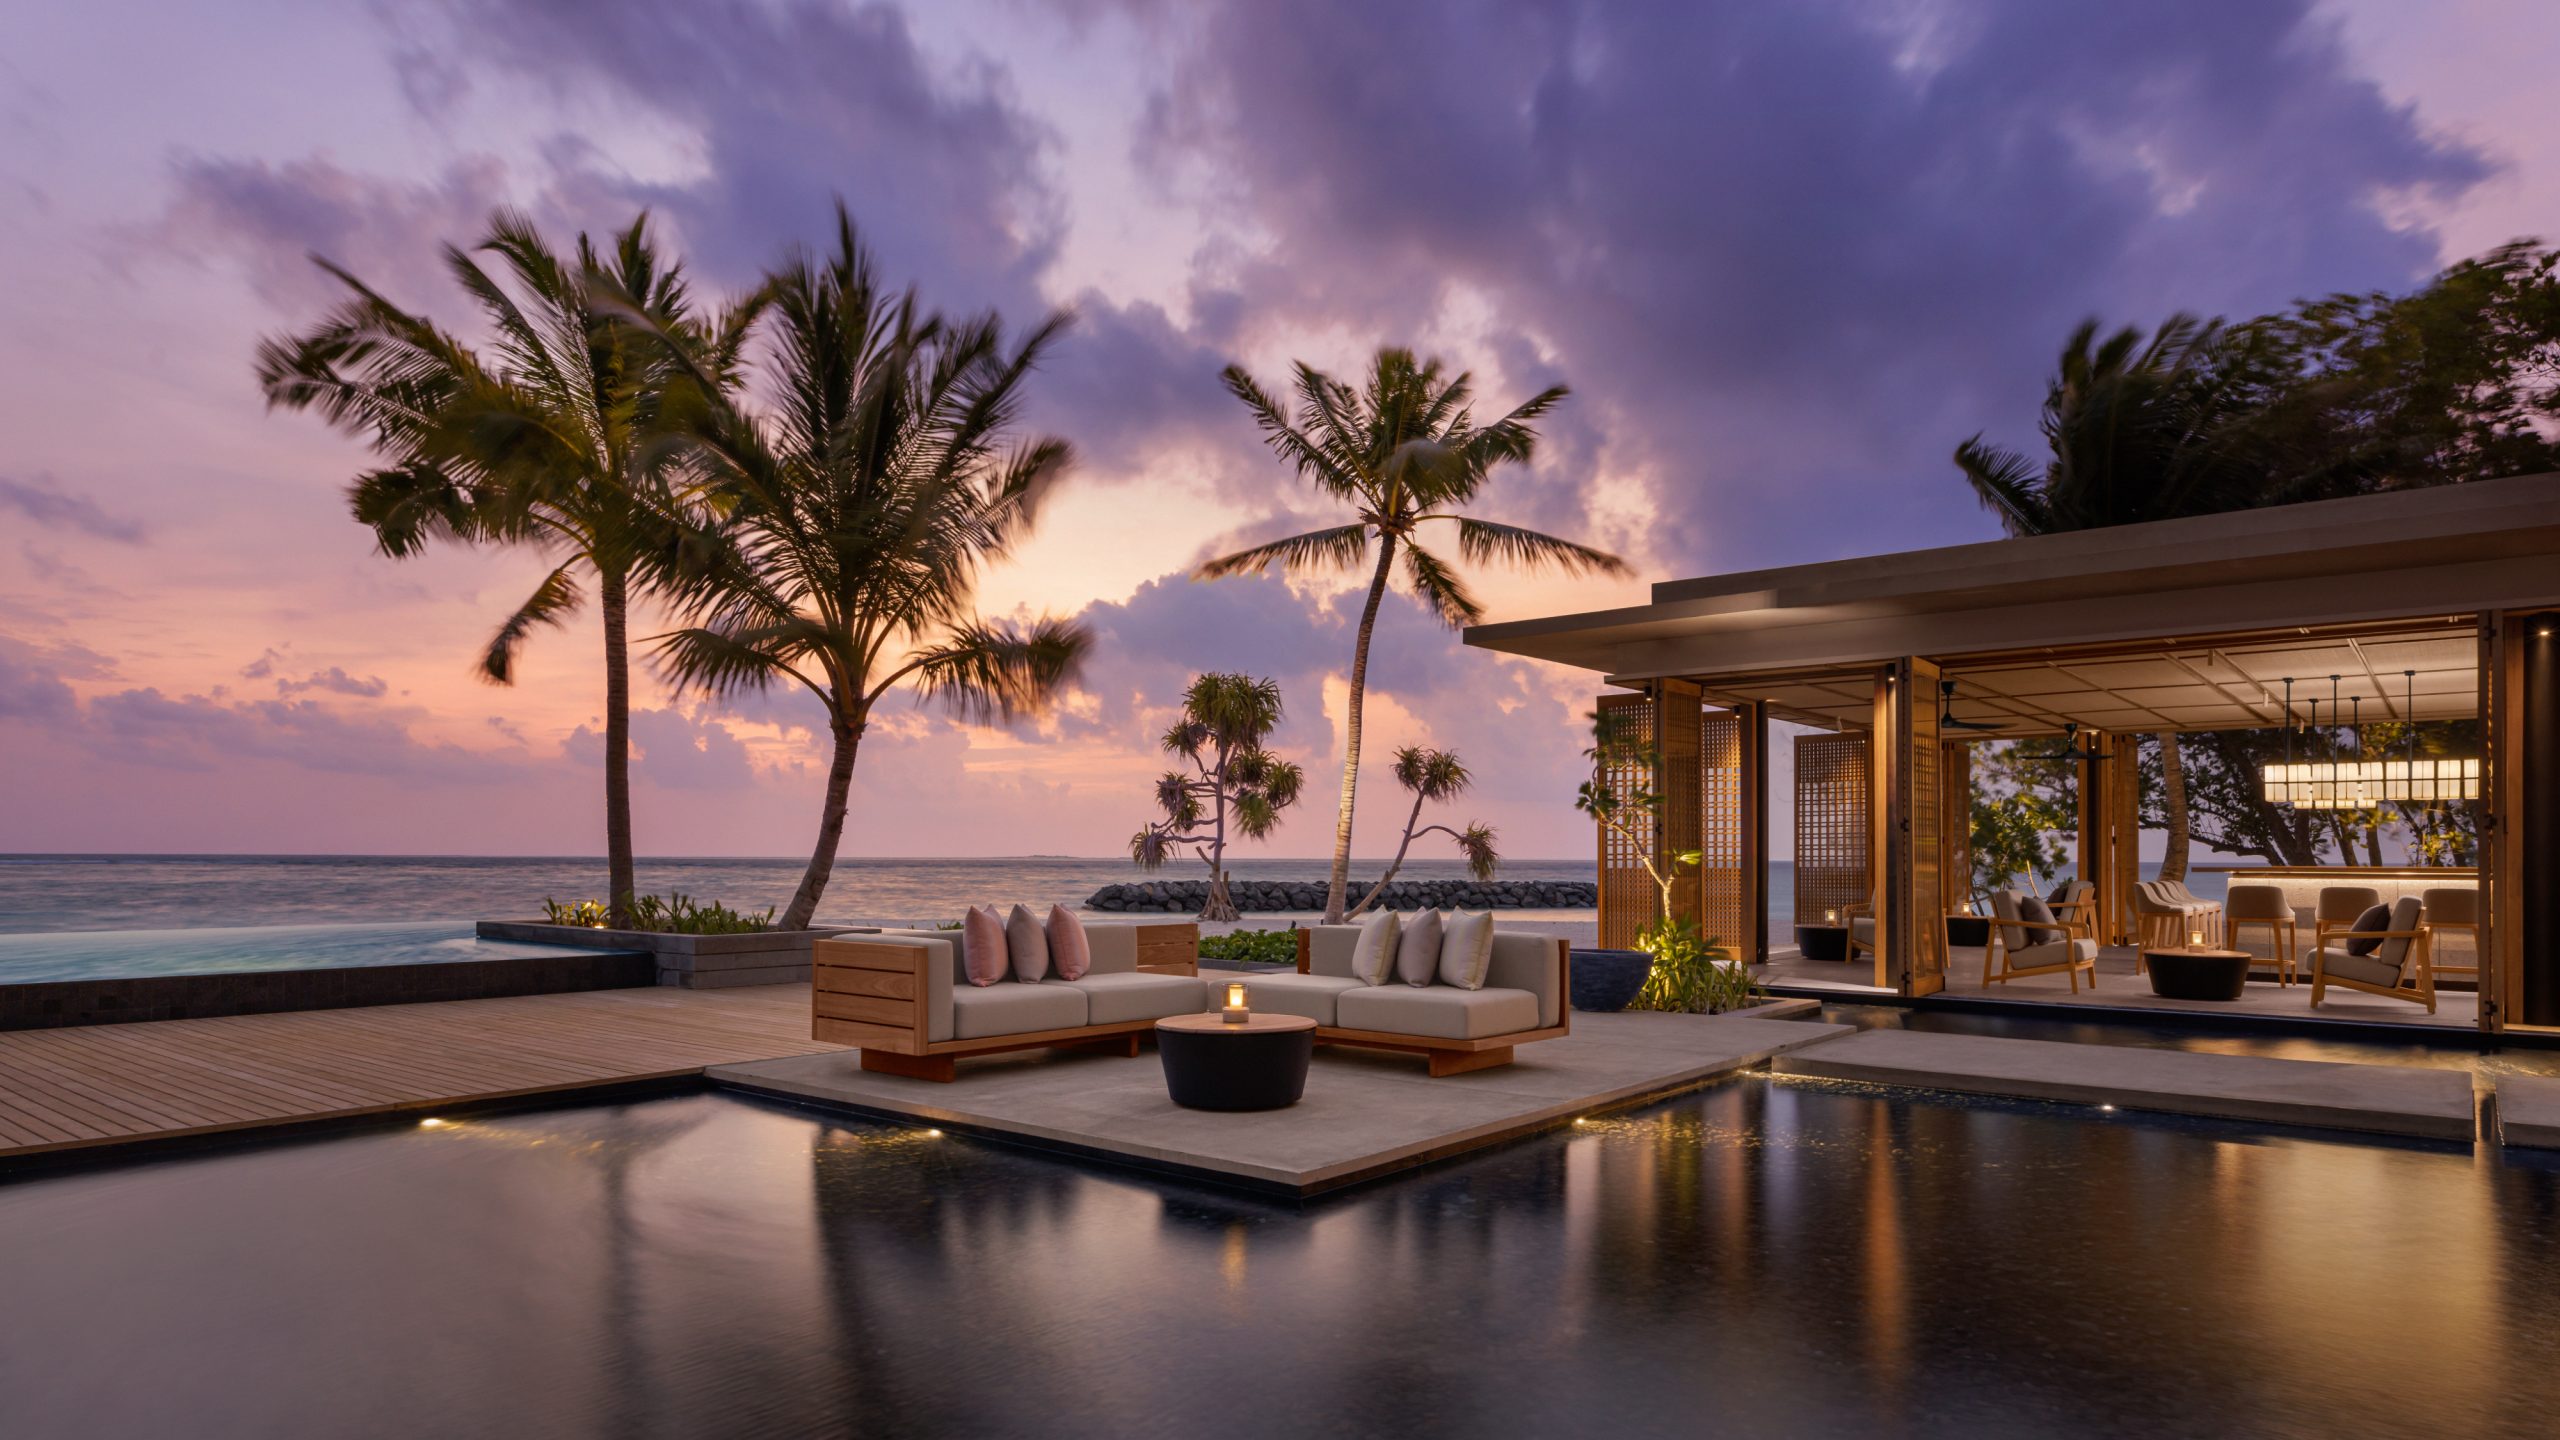 Lounge area by pool at sunset